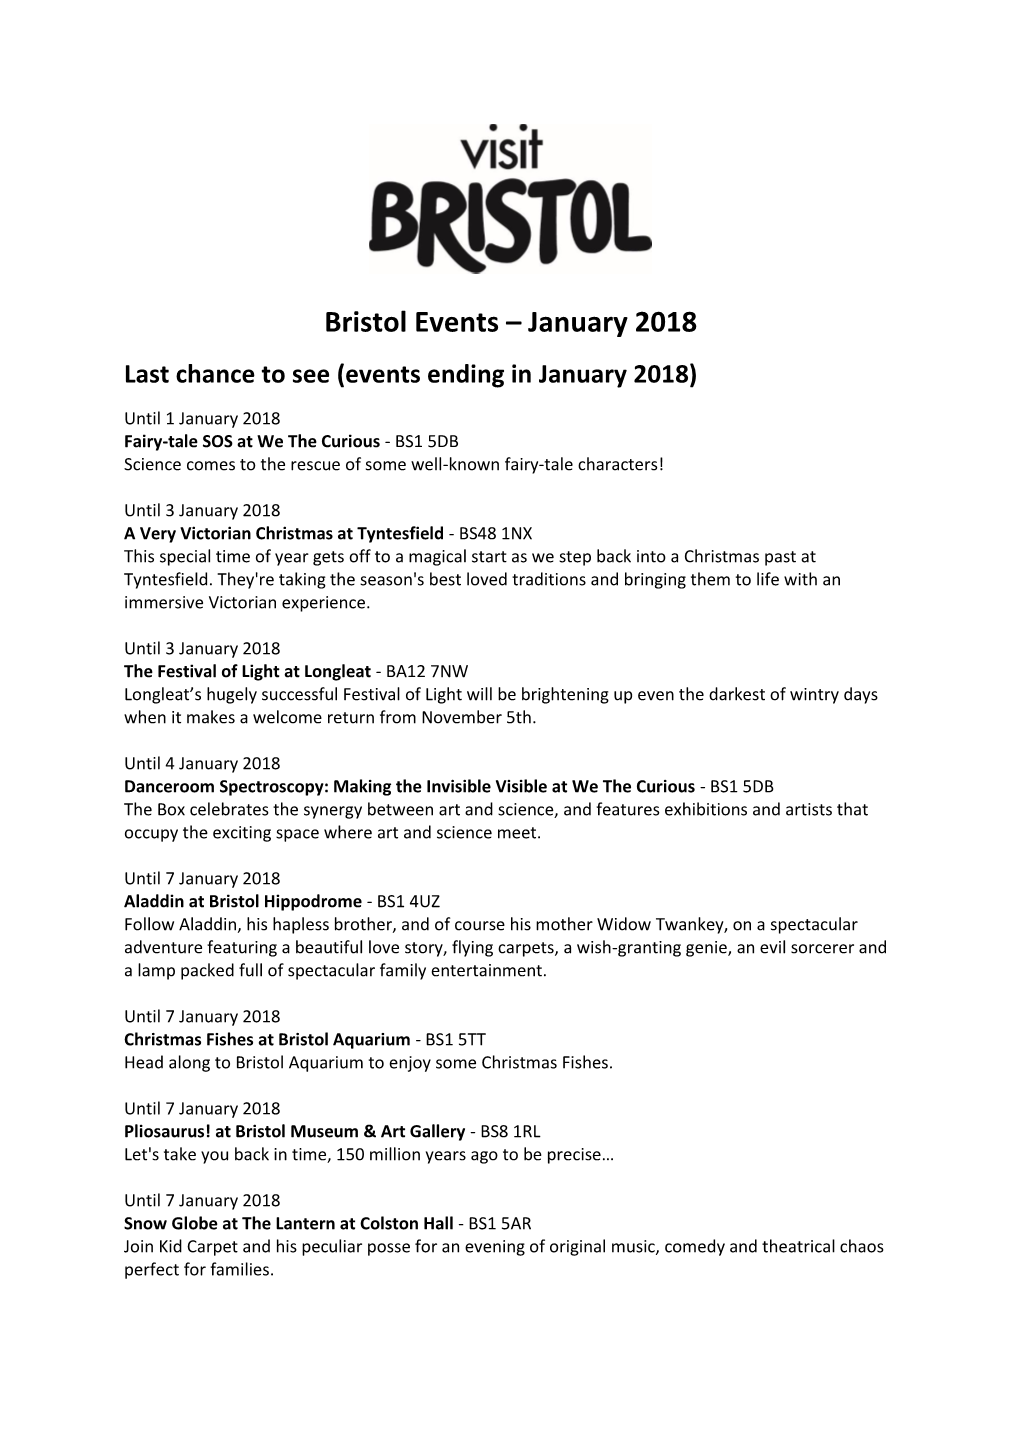 Bristol Events – January 2018 Last Chance to See (Events Ending in January 2018)